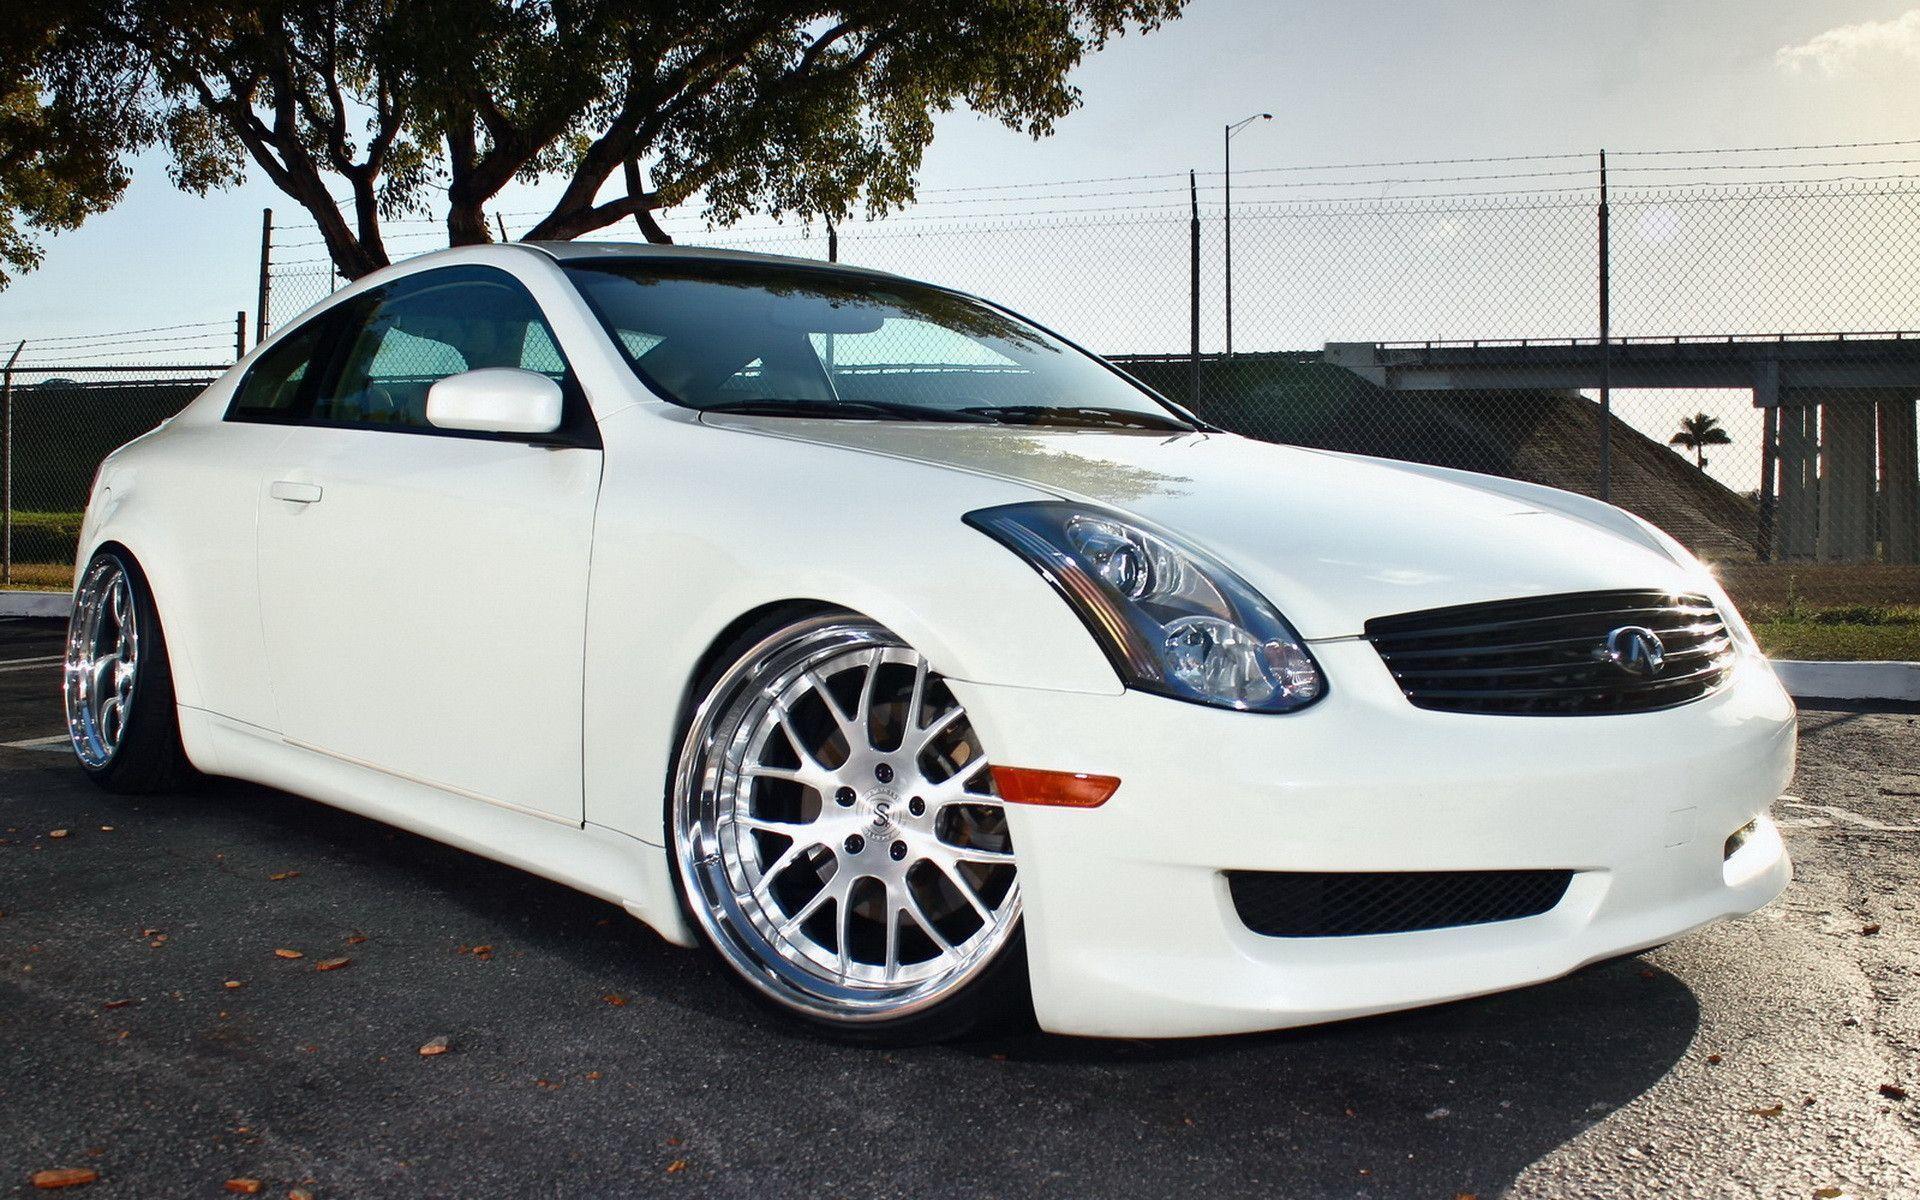 Infiniti G35 wallpaper and image, picture, photo